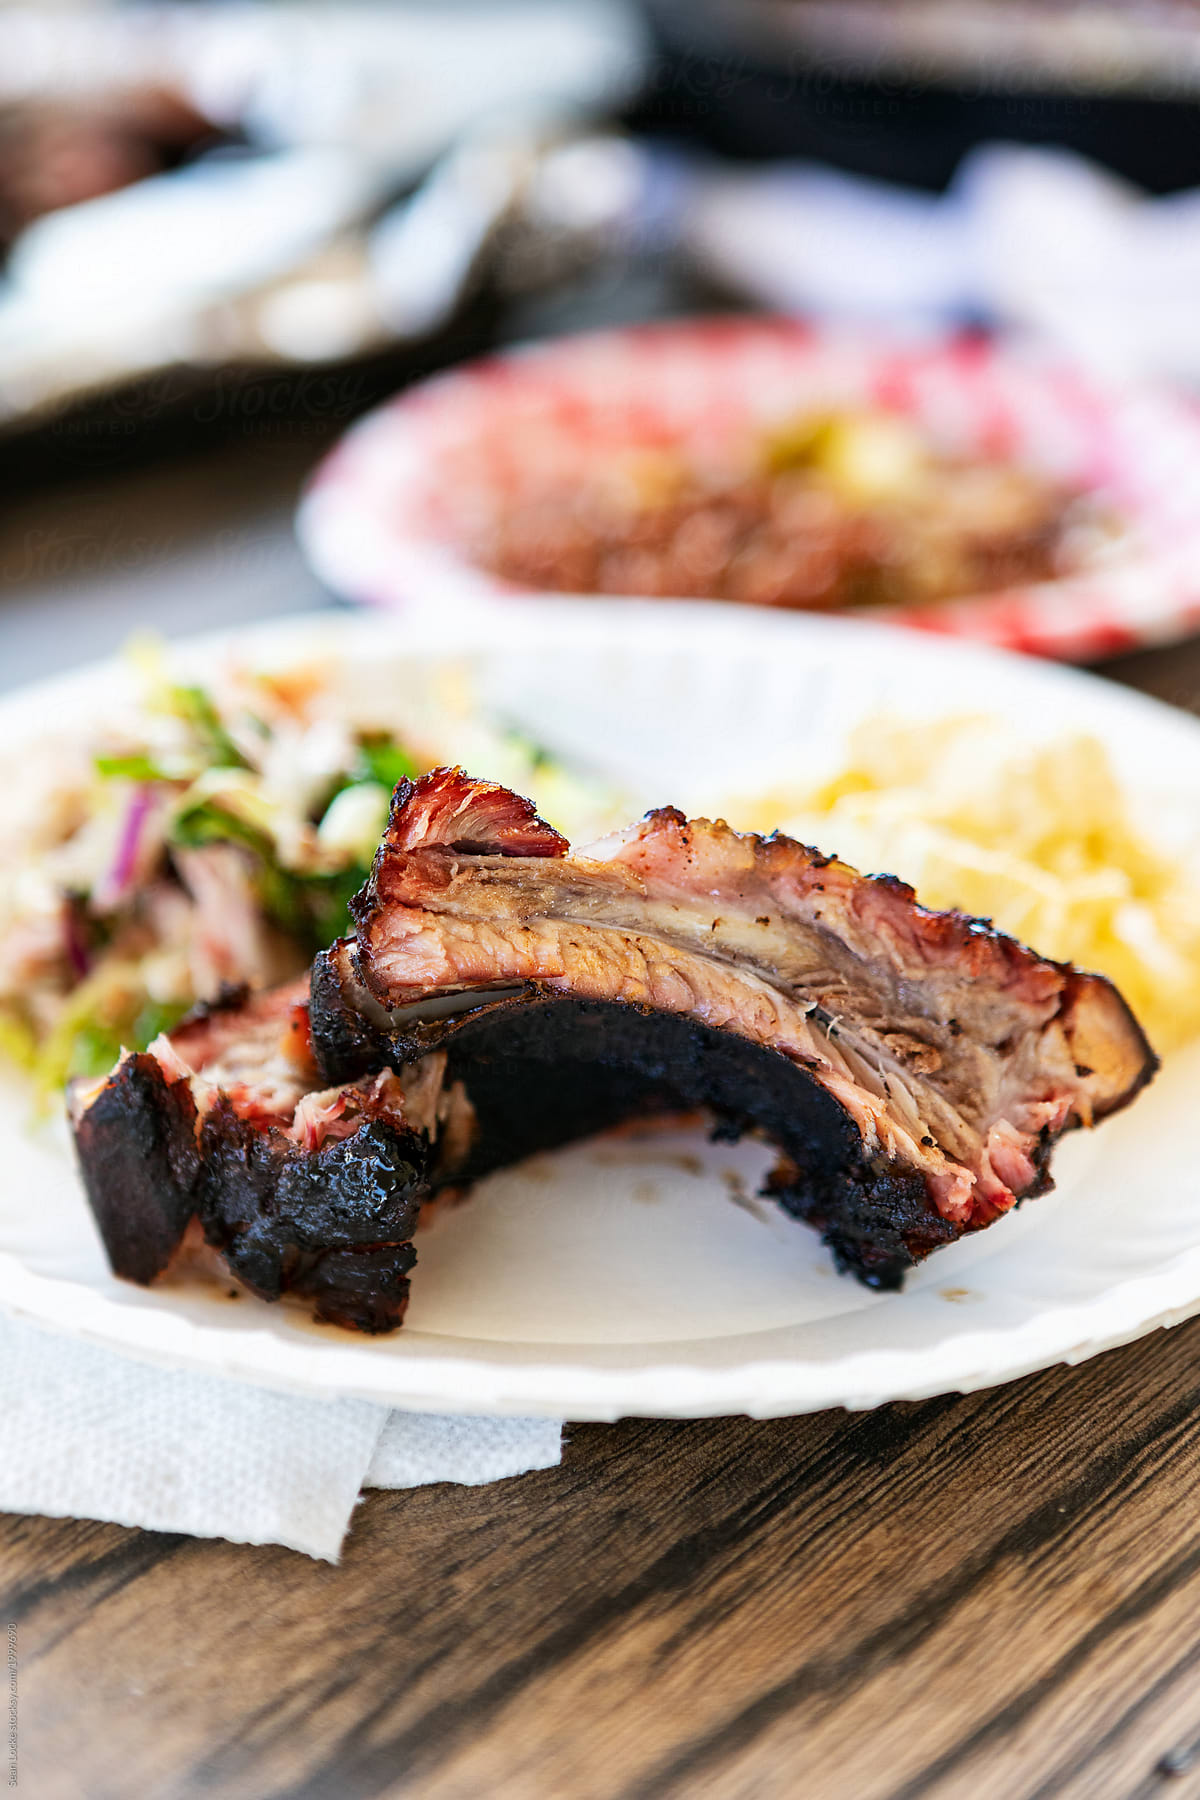 Smoked: Summer Picnic Dinner Of Ribs With Beans And Salads